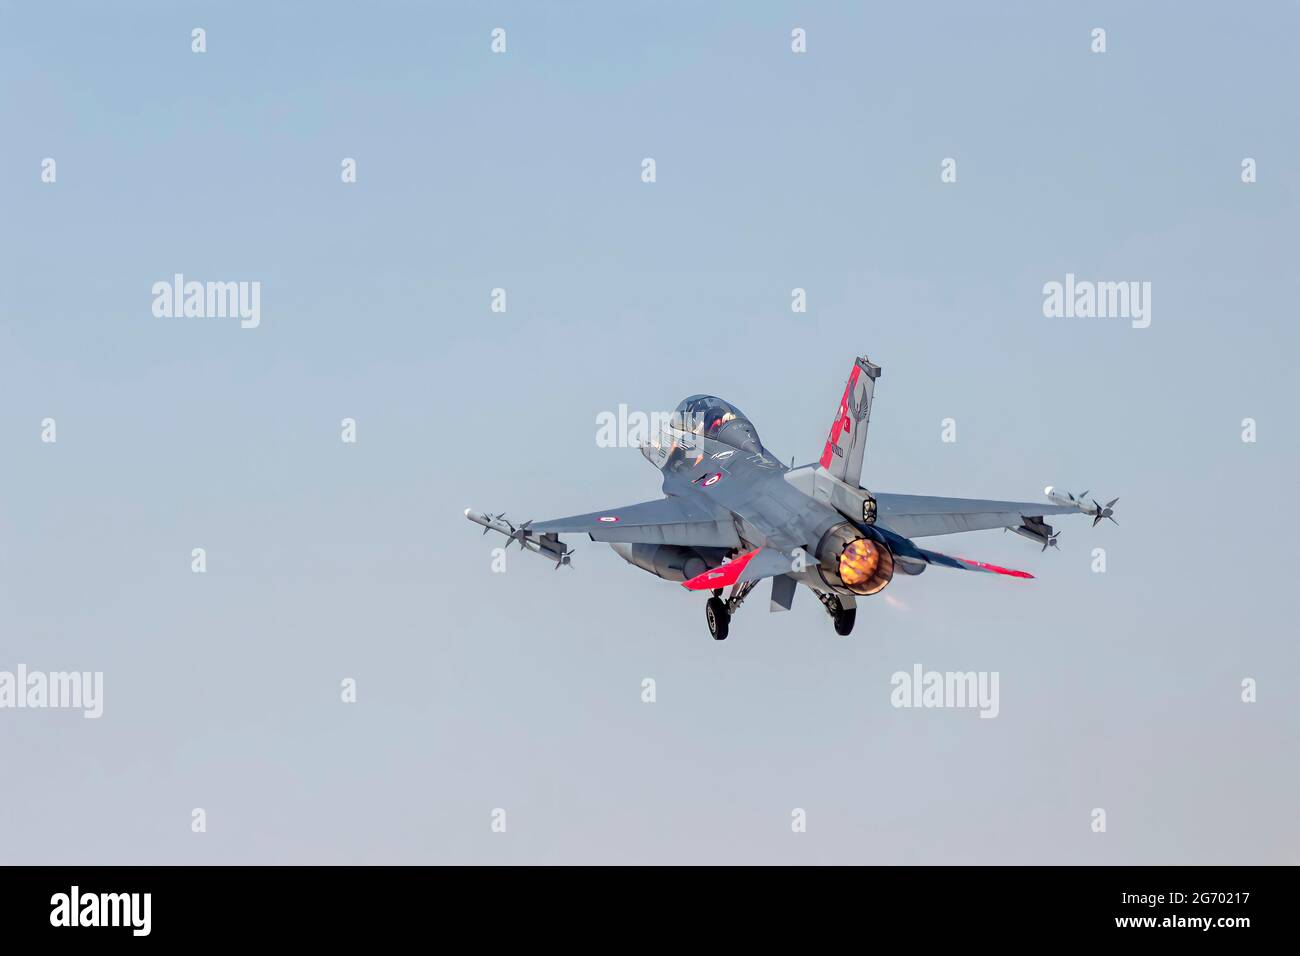 Konya-Turkey- 07 01 2021:Demonstrations of warplanes during the exercise with international participation in Turkey with the name Anatolian Eagle Stock Photo